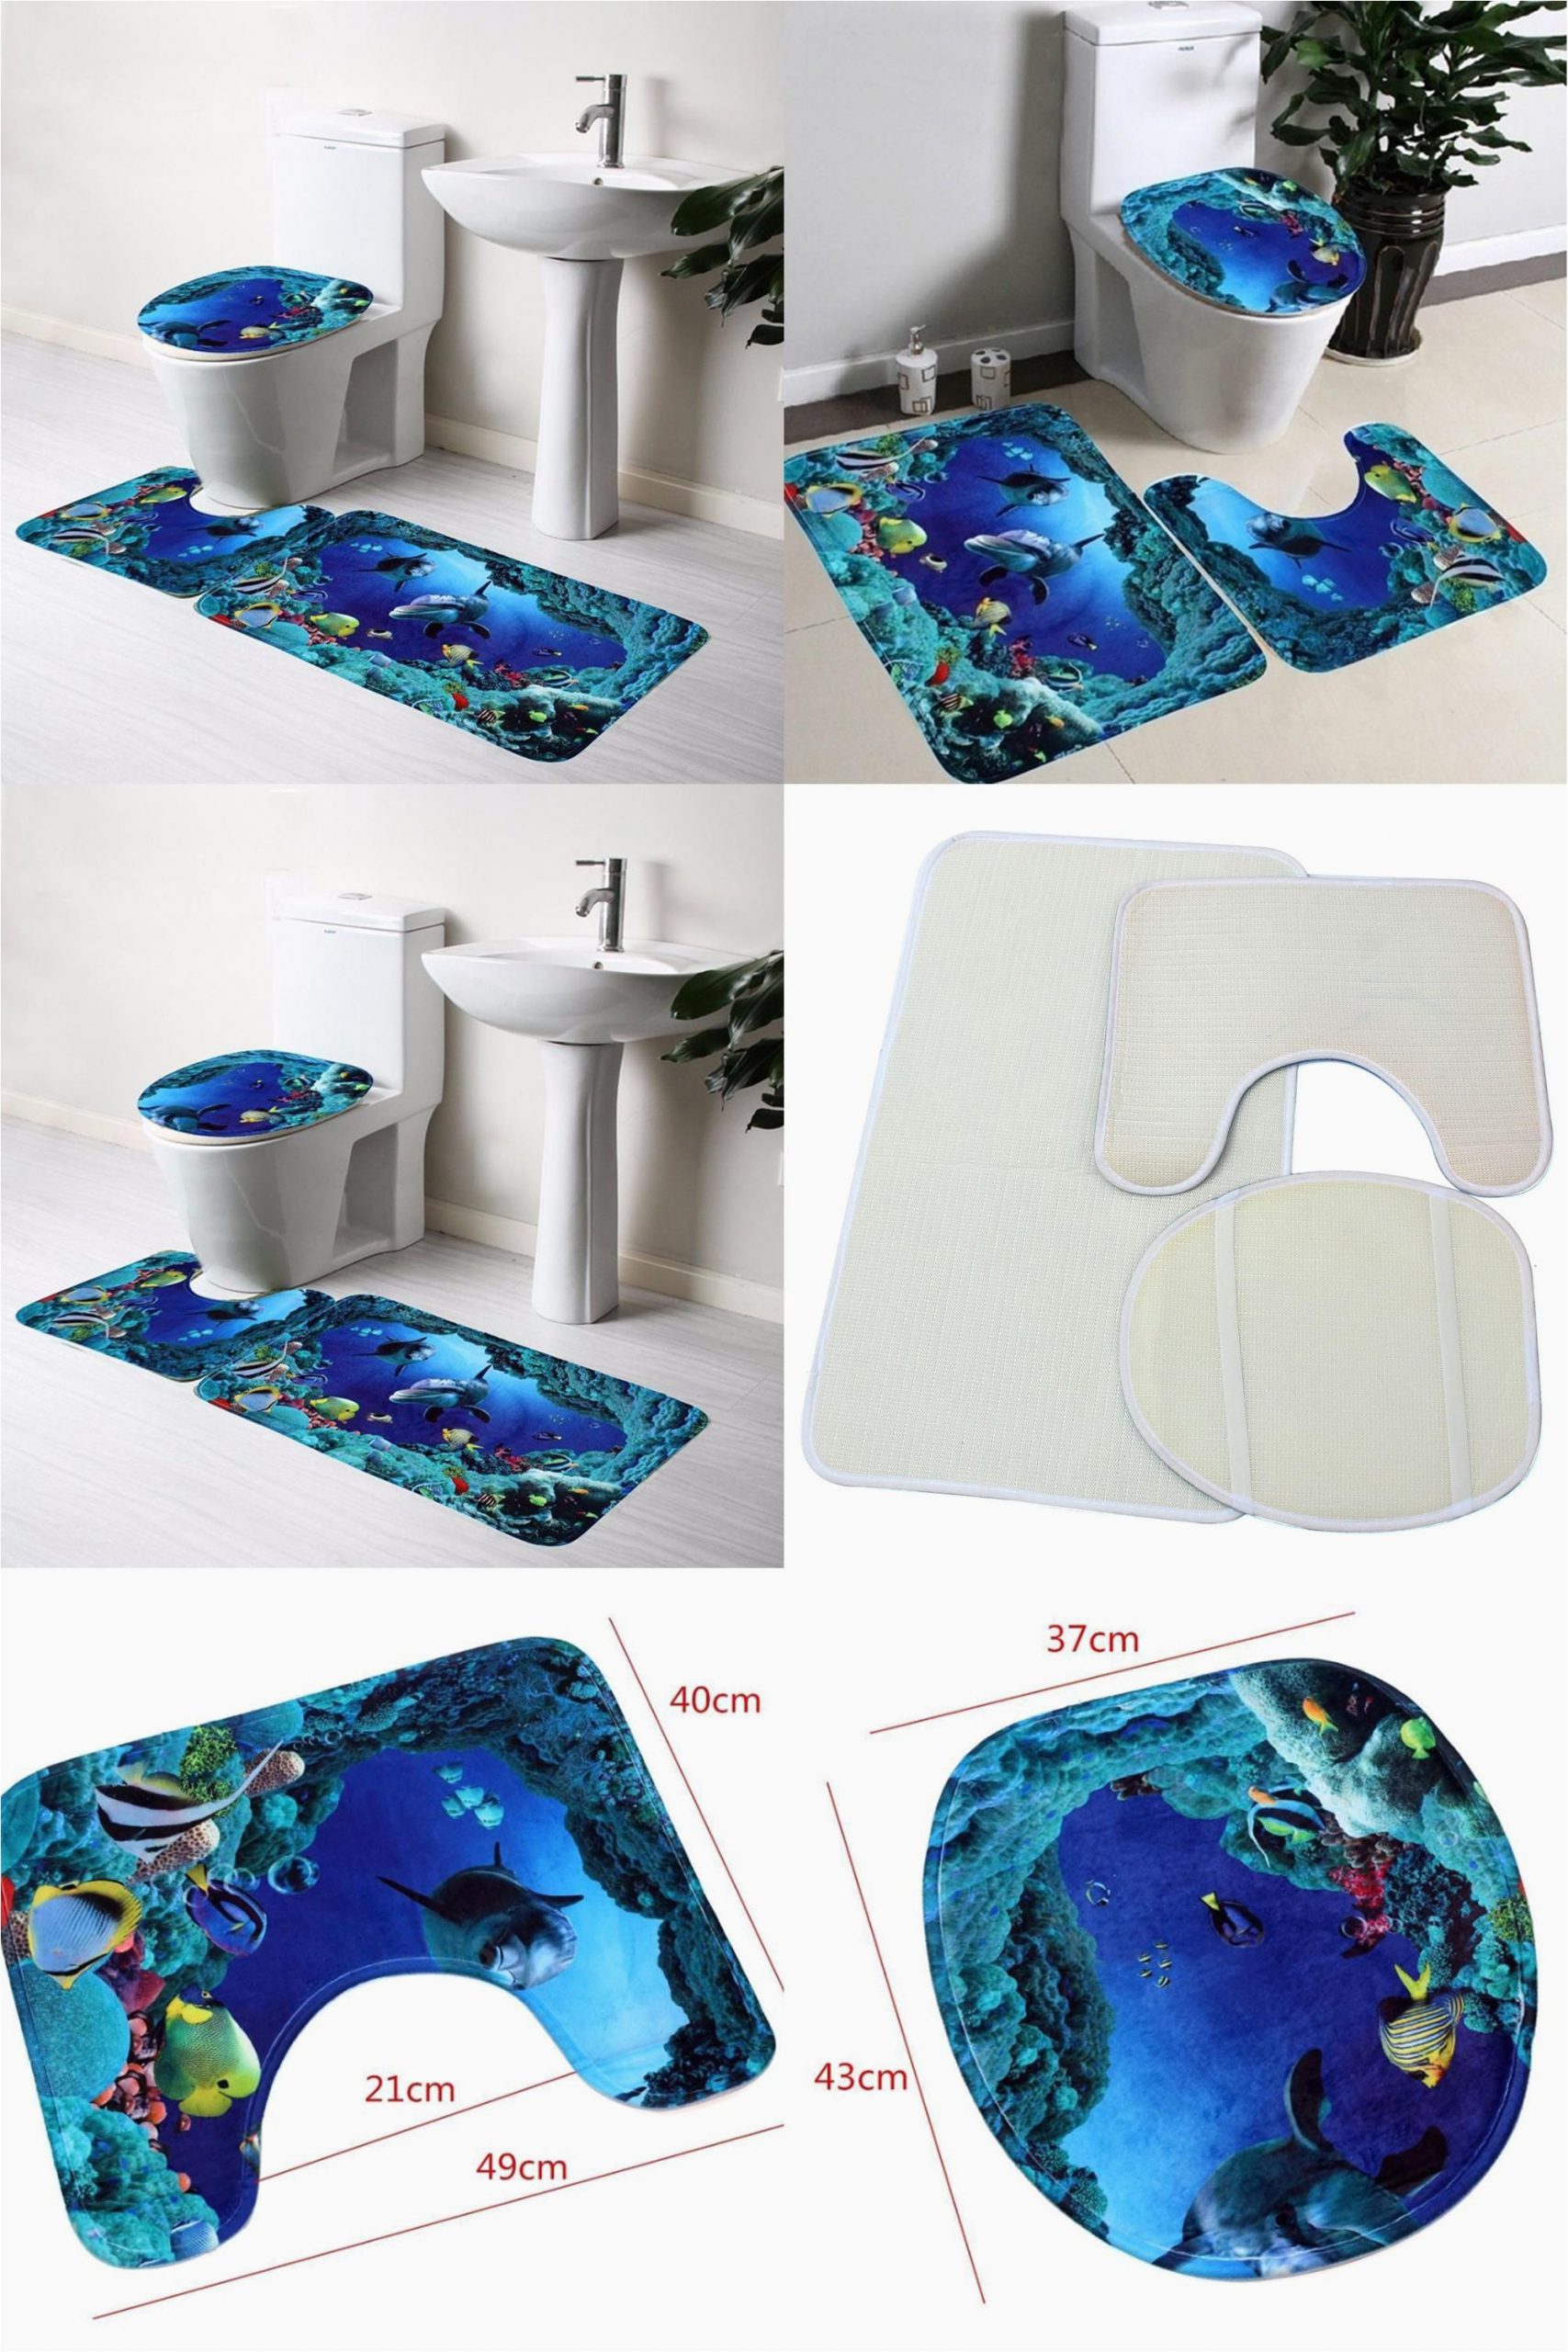 Bathroom Rugs and Accessories Visit to Buy] Bathroom Accessories 3pcs Bathroom Non Slip